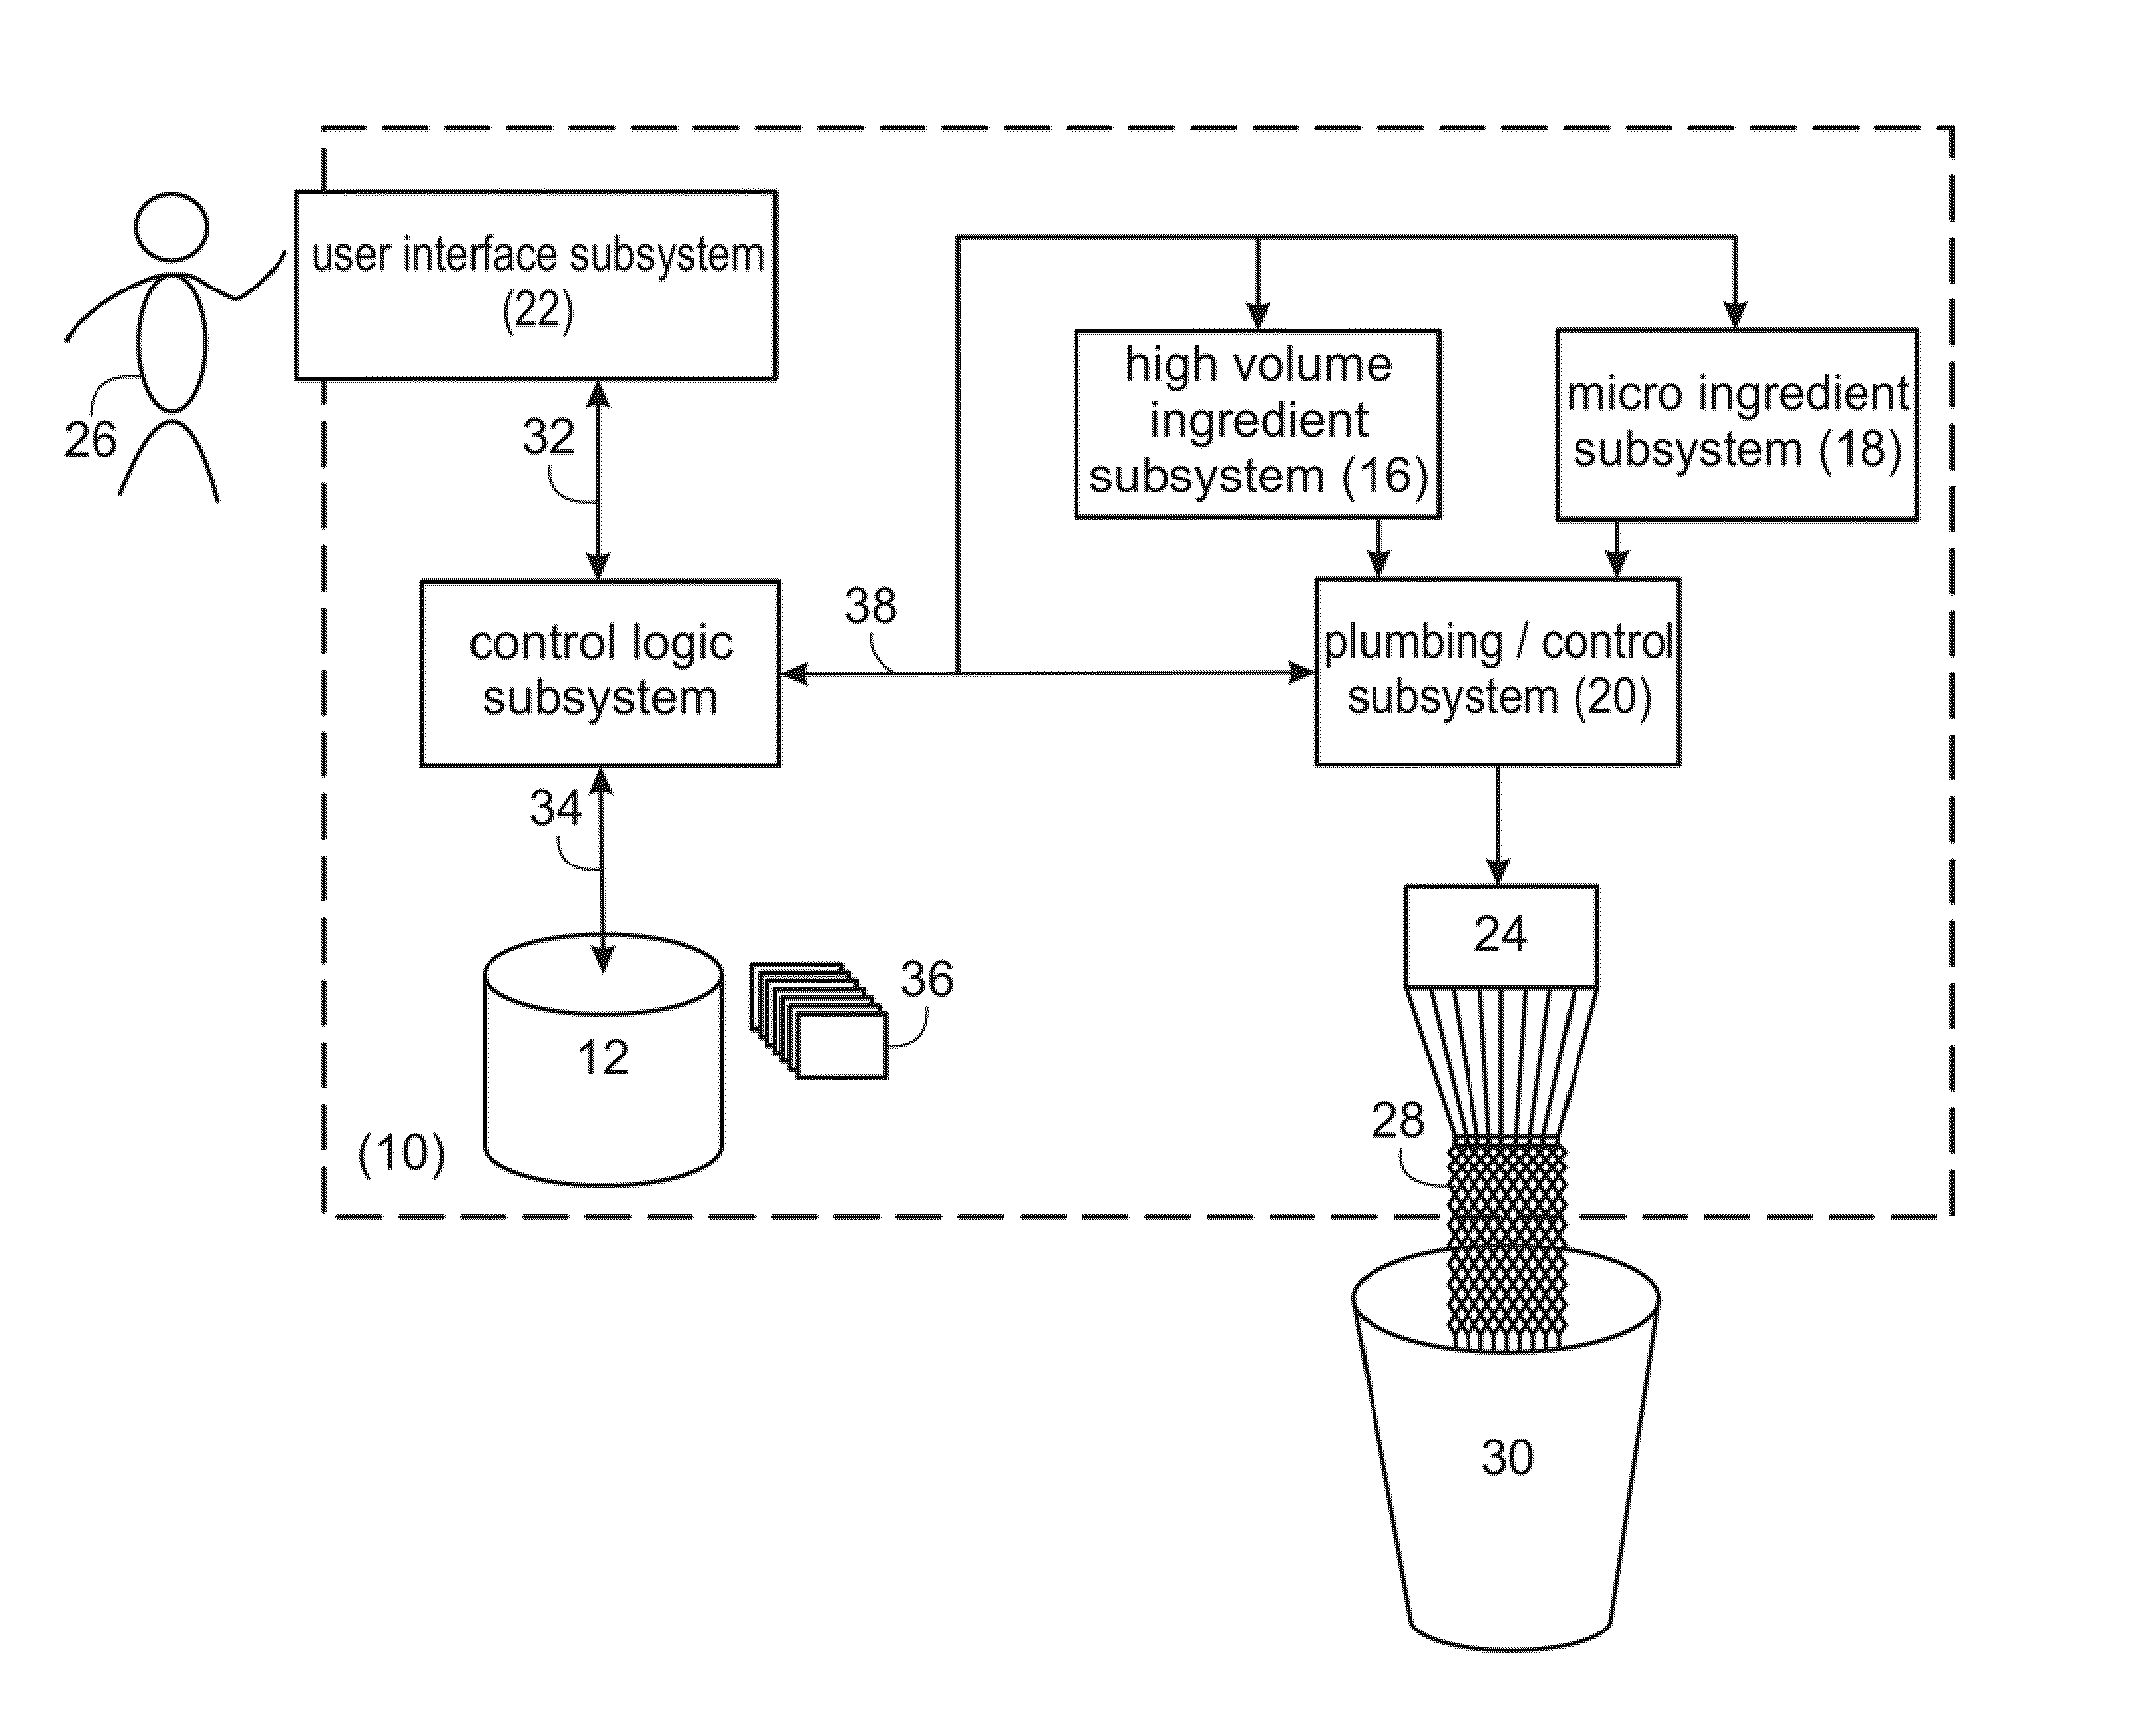 Product dispensing system